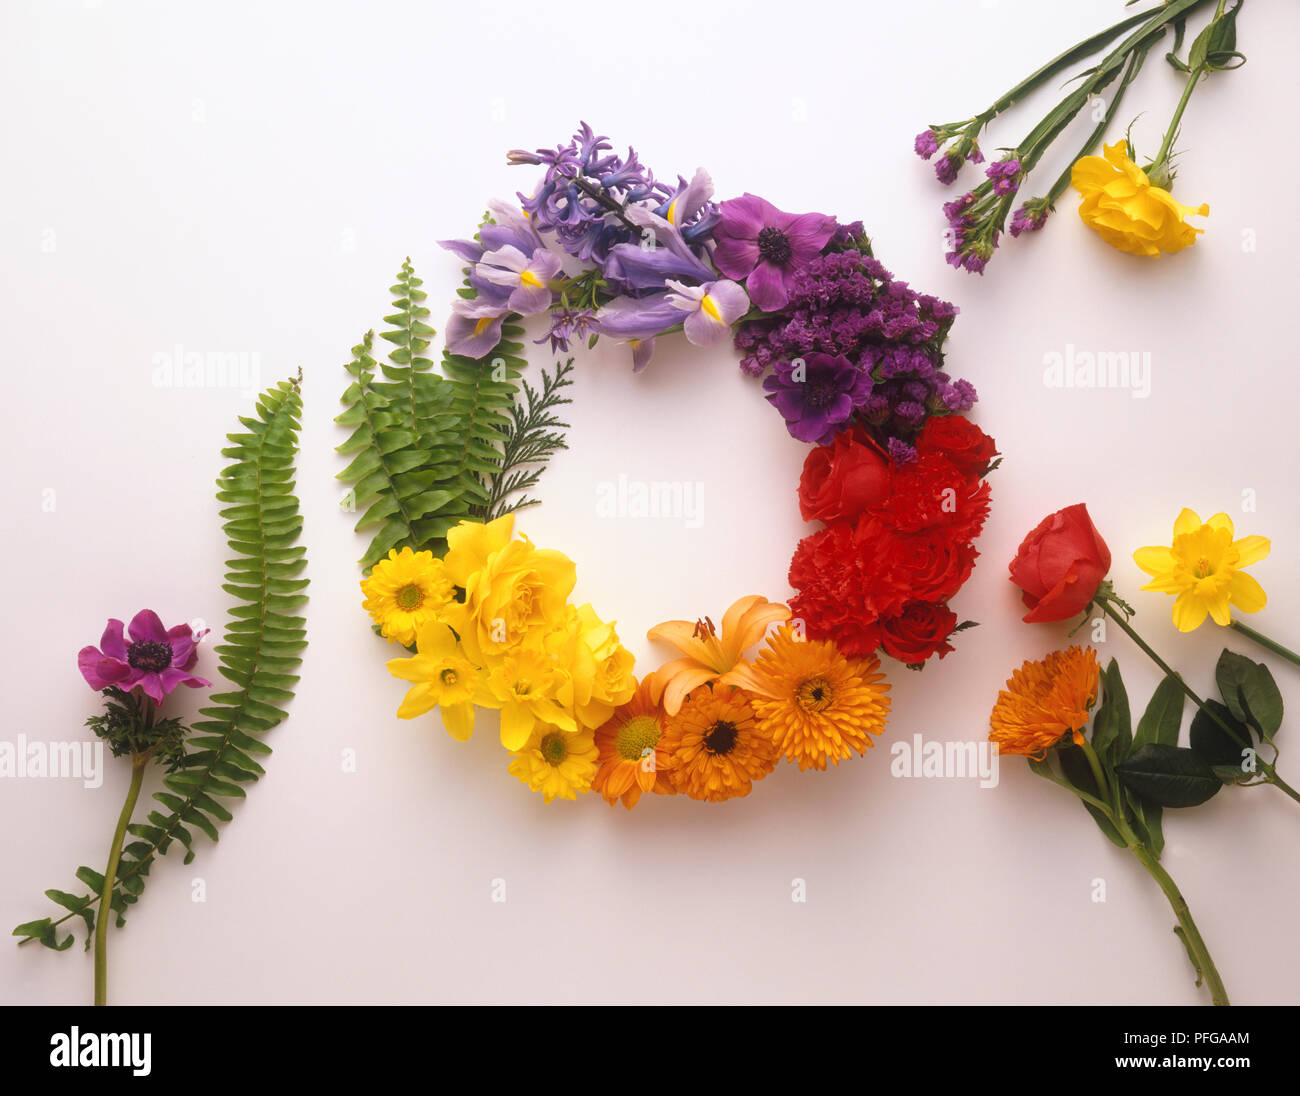 Wreath of different coloured flowers, including anemone, narcissus, chrysanthemum, iris, hyacinth, anemone, stachys, rose, dianthus, lily and fern Stock Photo